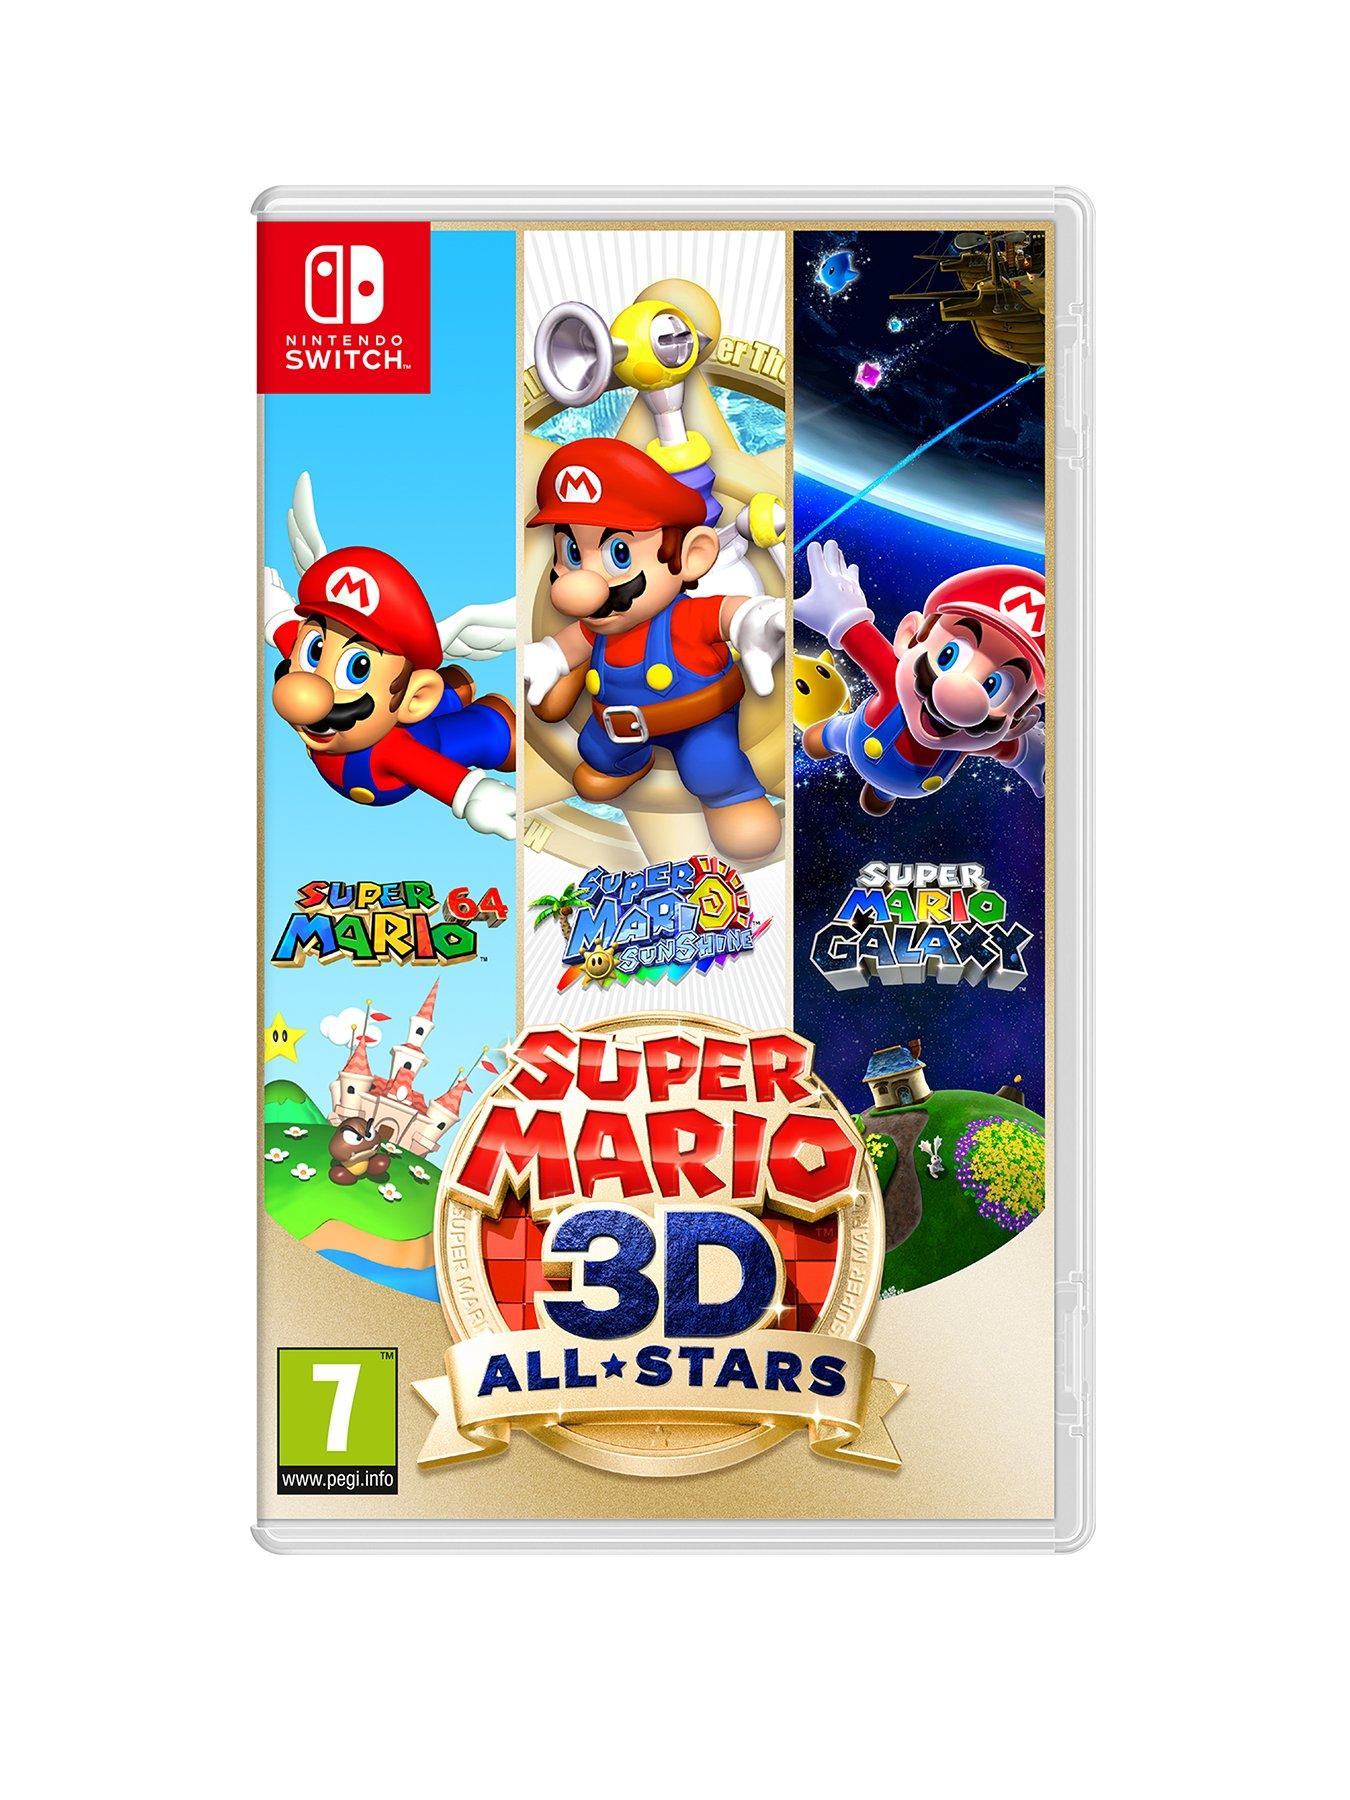 how much does mario 3d all stars cost